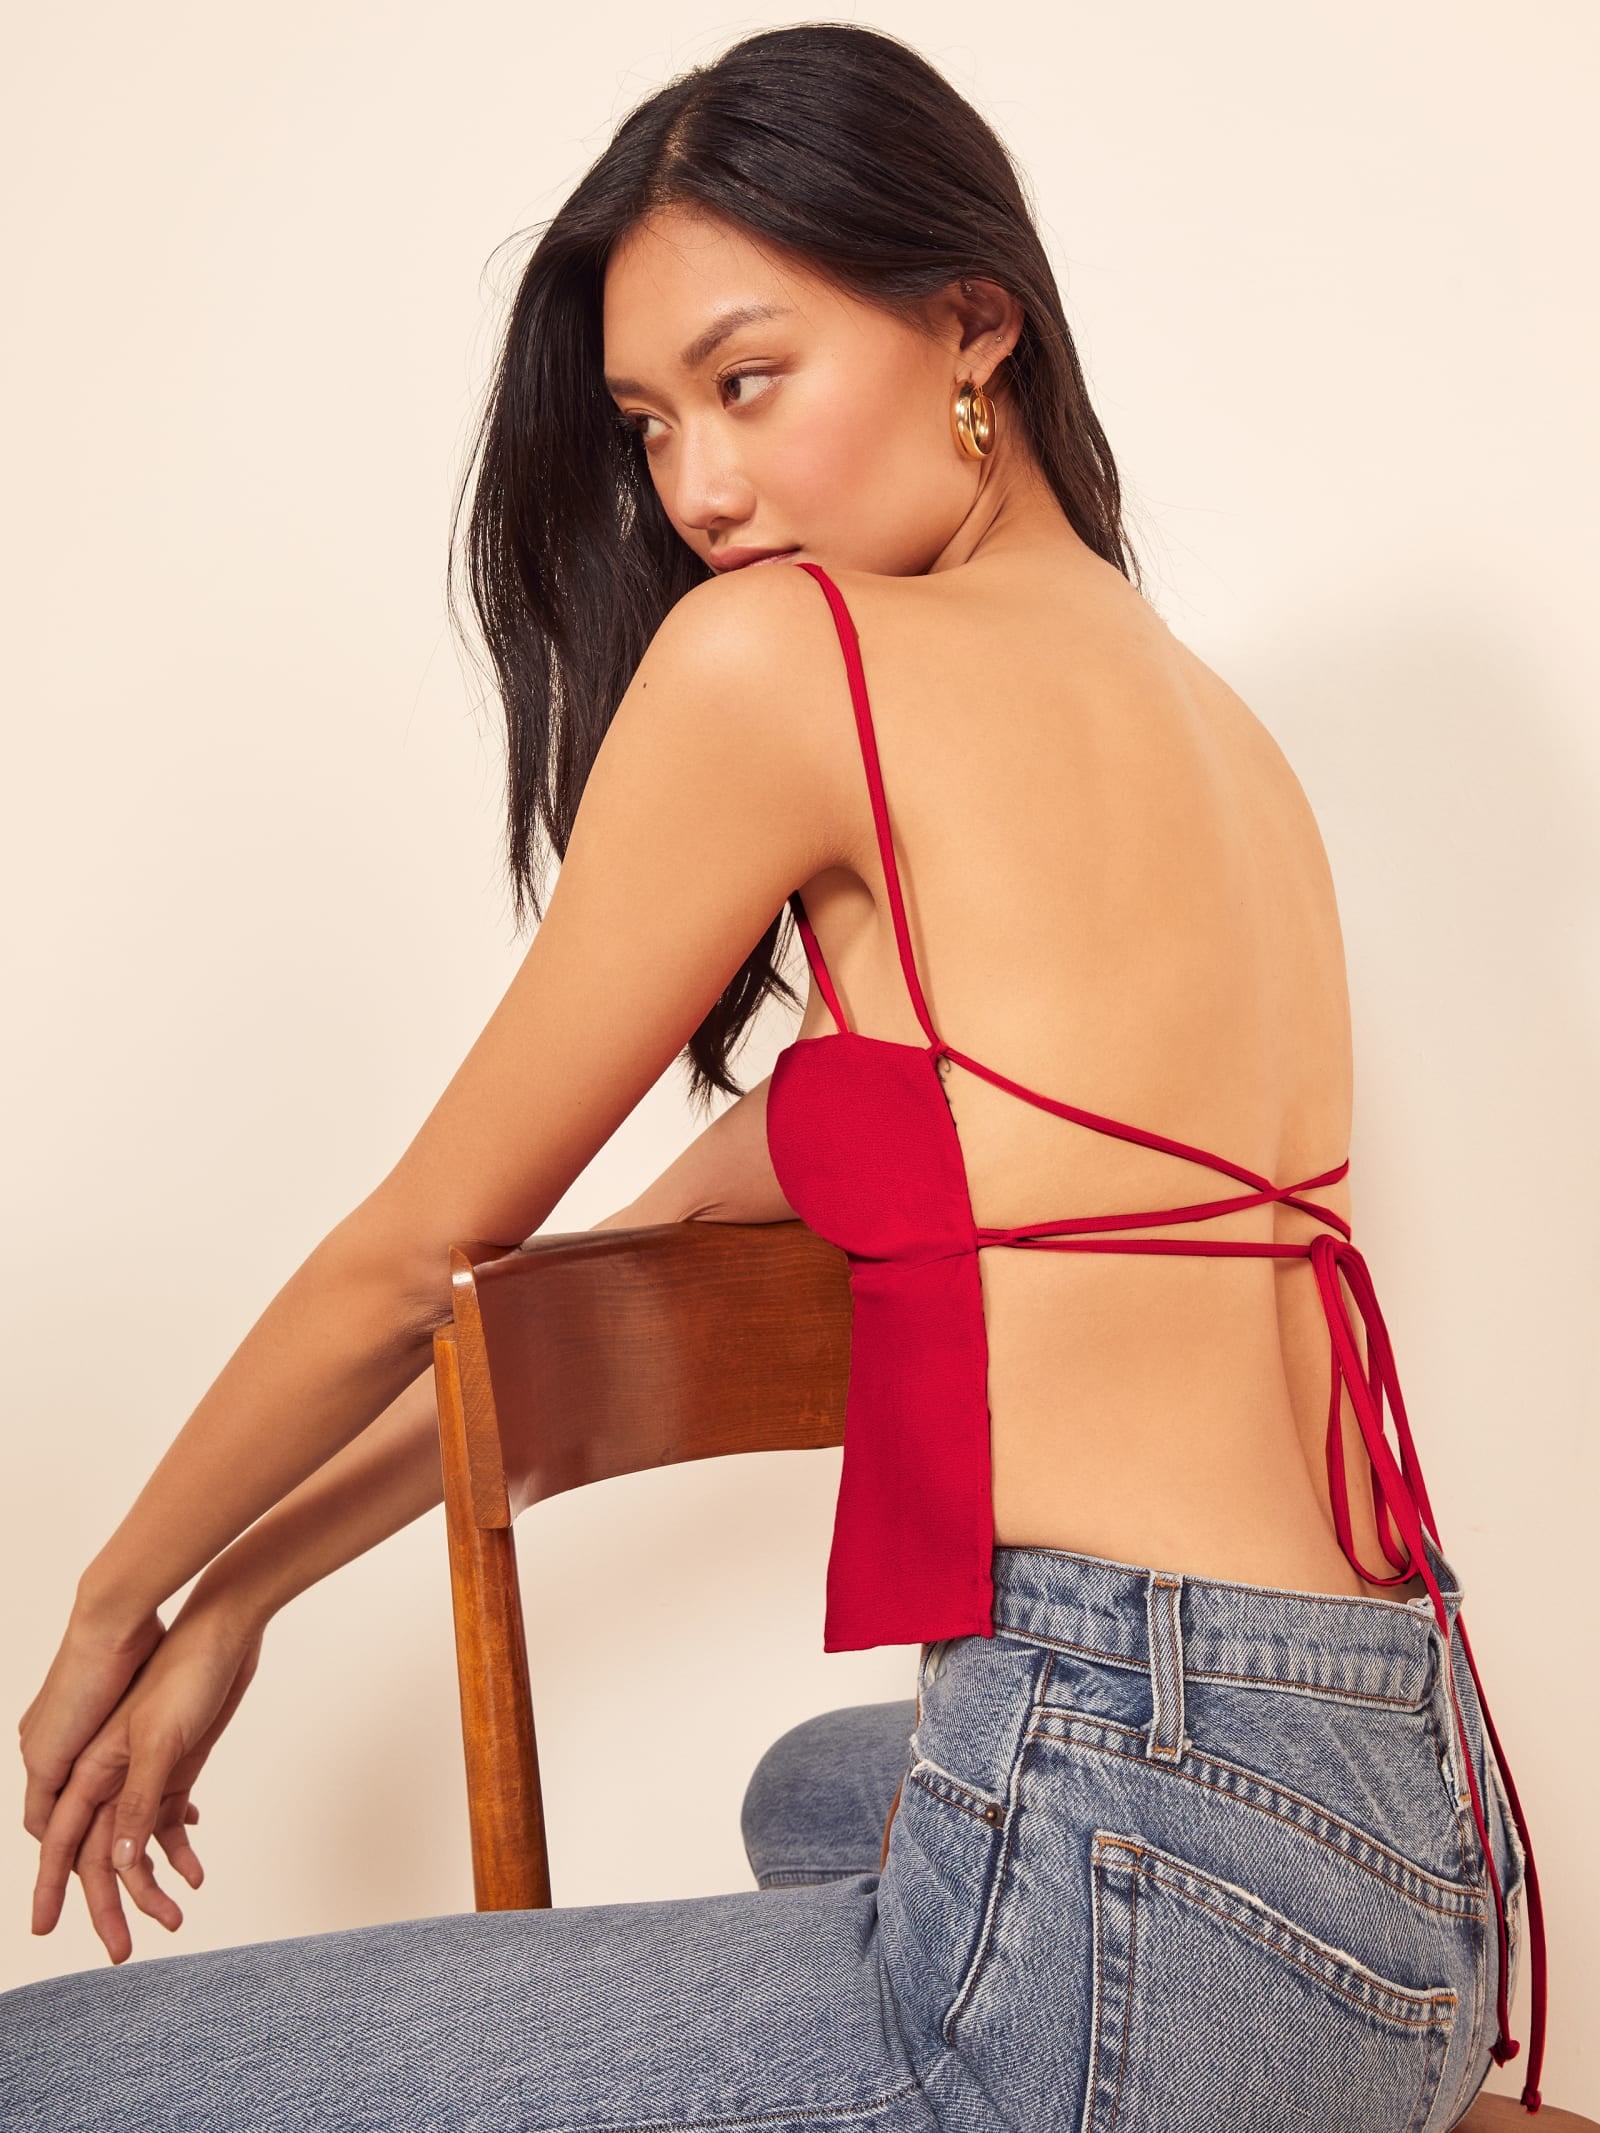 How to Make a Sexy Backless Halter Top For Hot Summer Nights